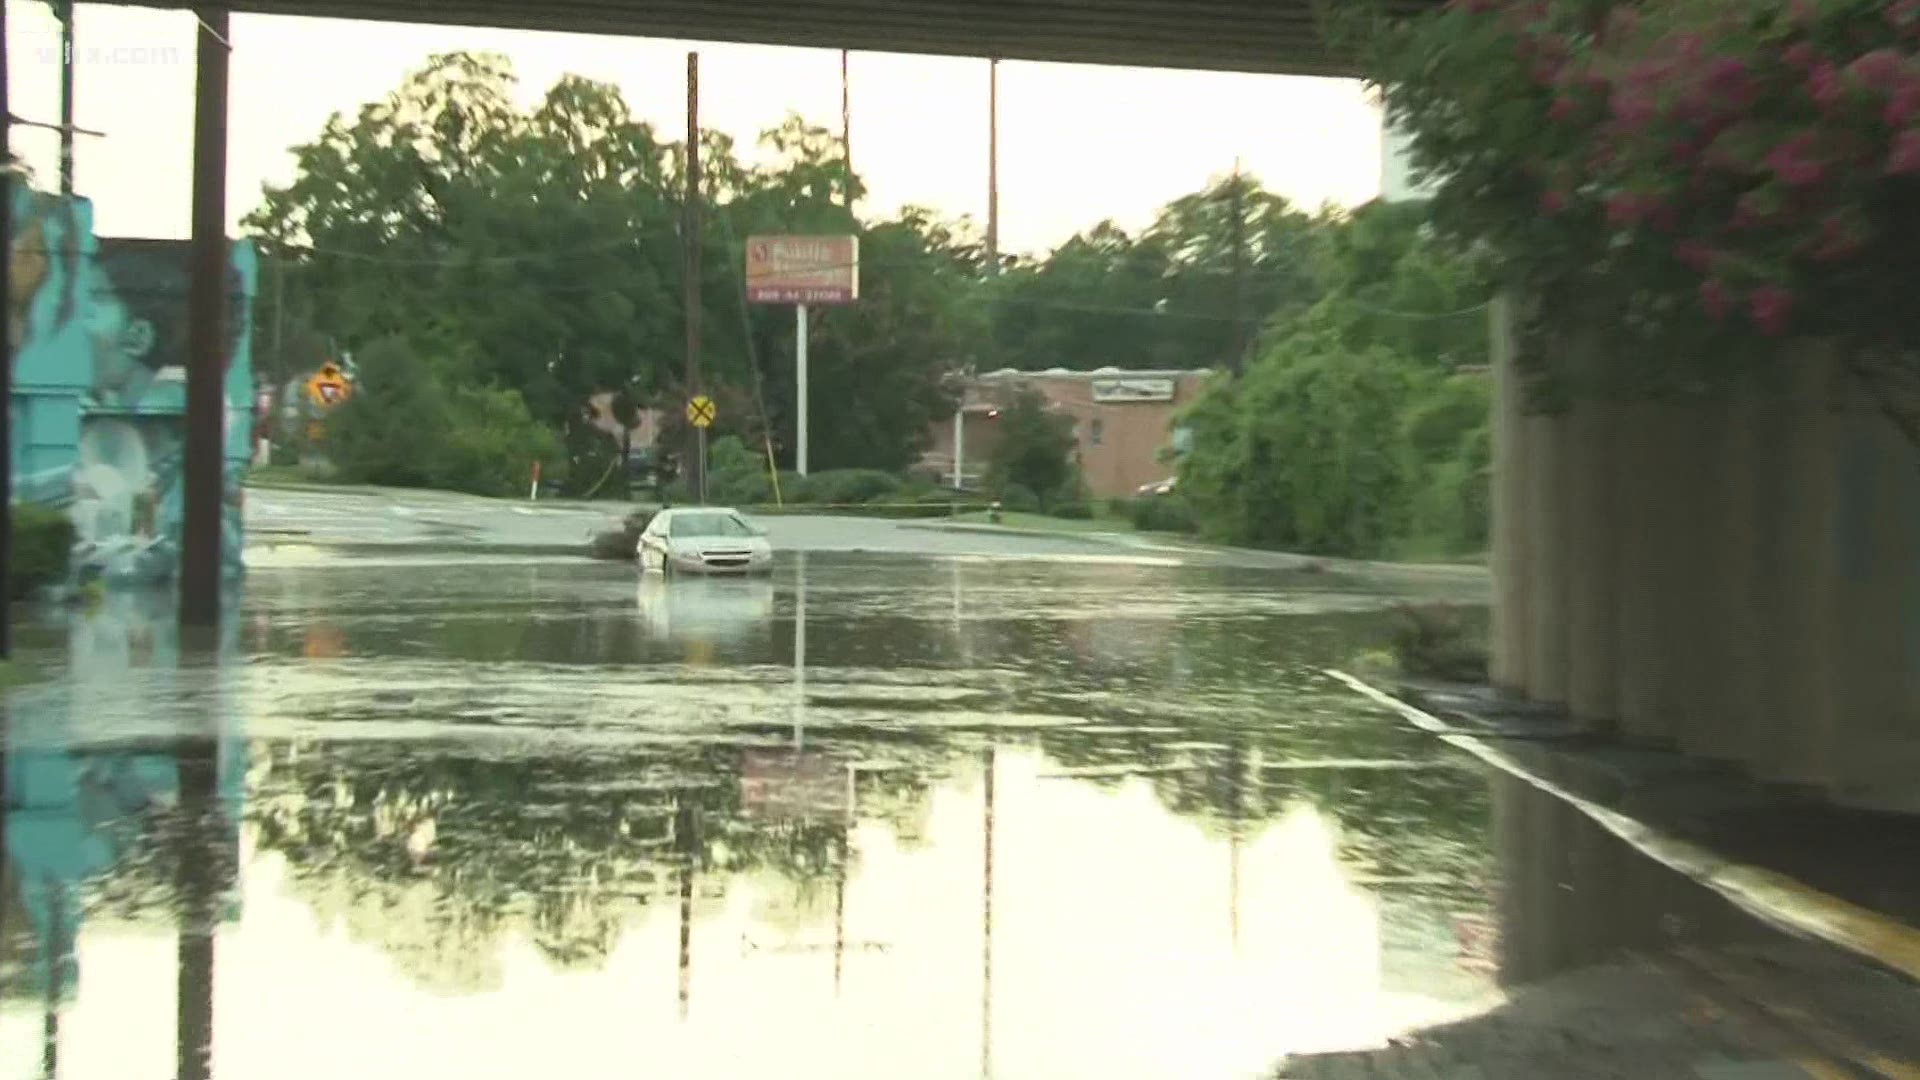 The area is just one of many that experienced heavy flooding in the region.